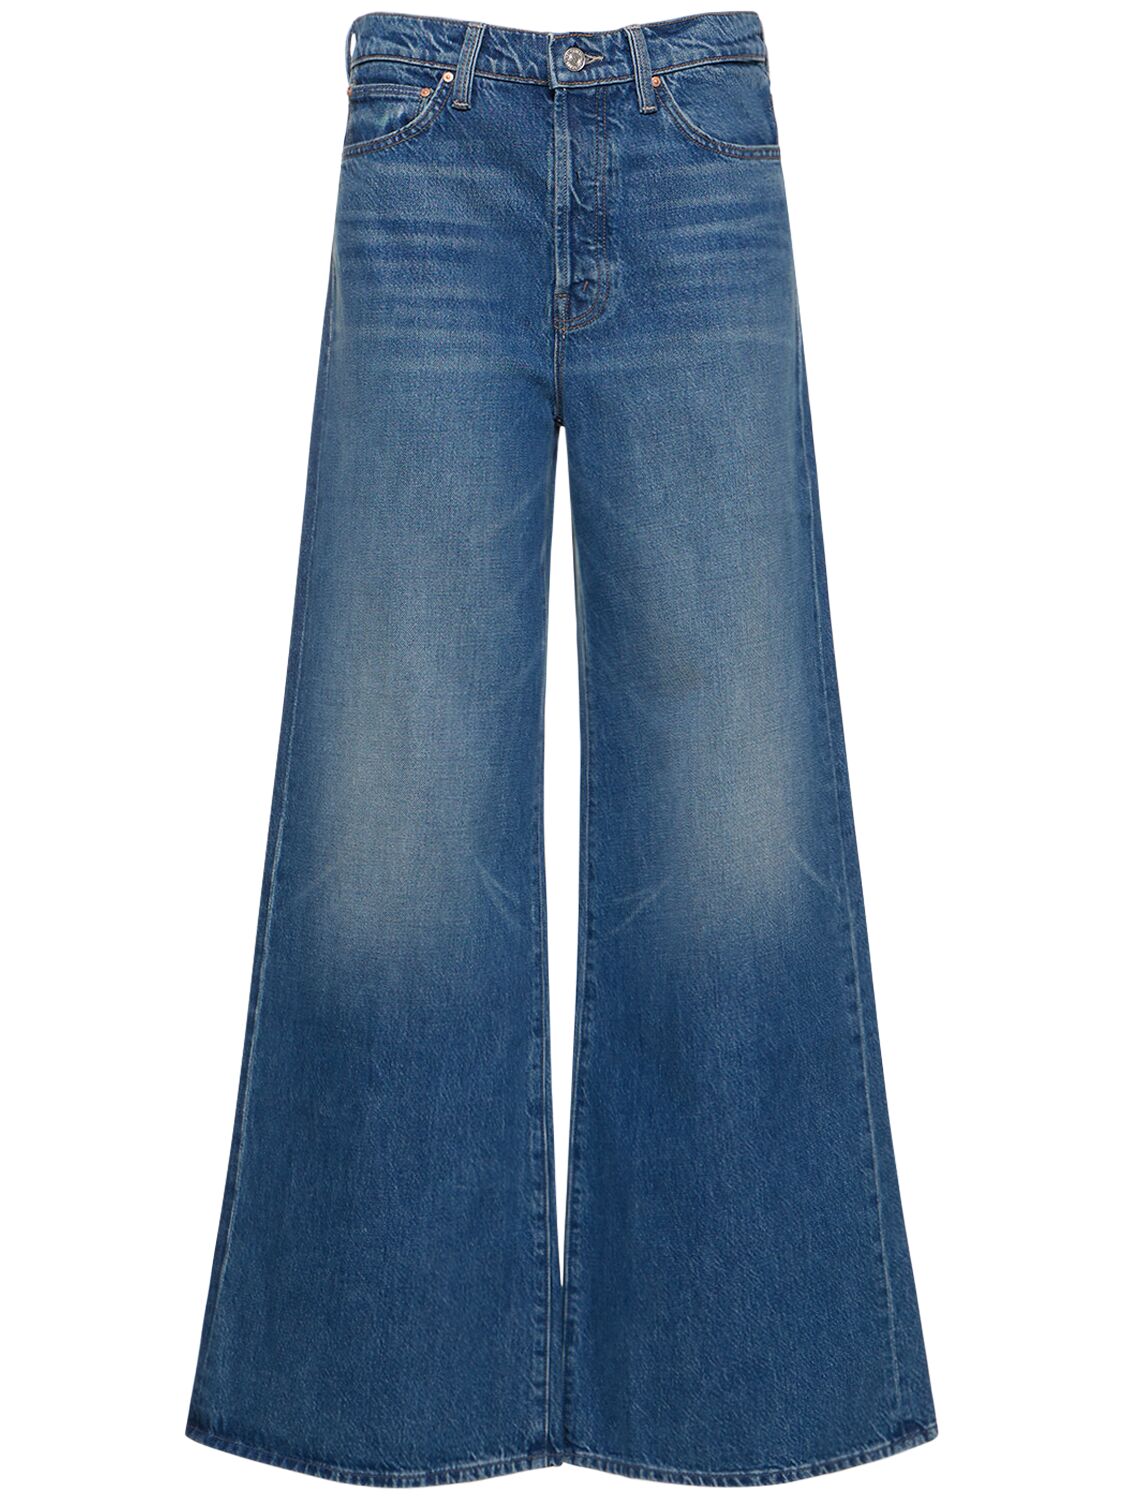 Image of The Ditcher Roller High Rise Cotton Jean